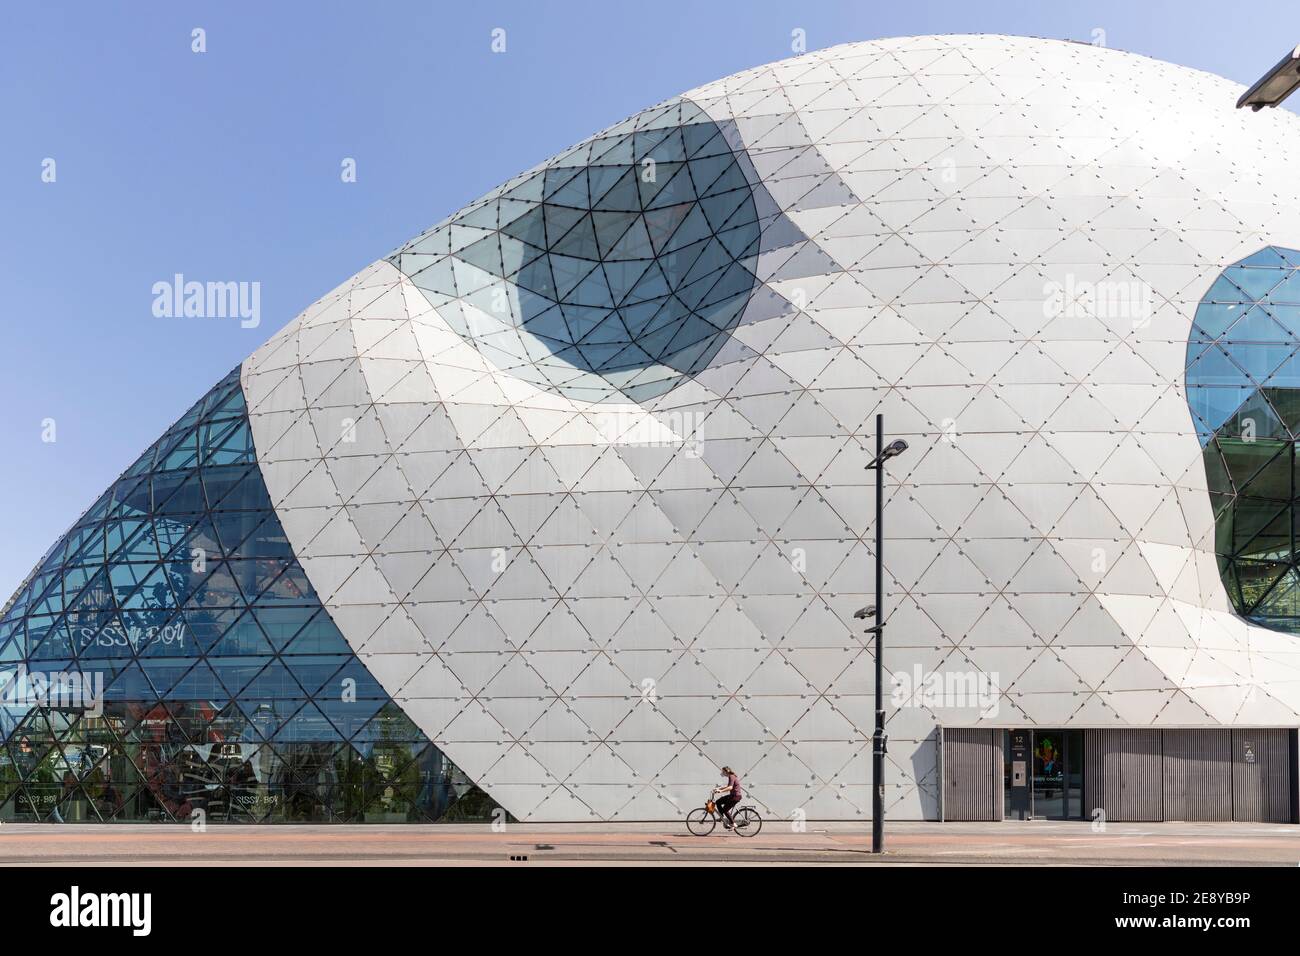 Eindhoven, The Netherlands, April 21st 2020. Exterior of the famous ’Blob’ building designed by Massimiliano Fuksas. A cyclist passing by on a sunny d Stock Photo